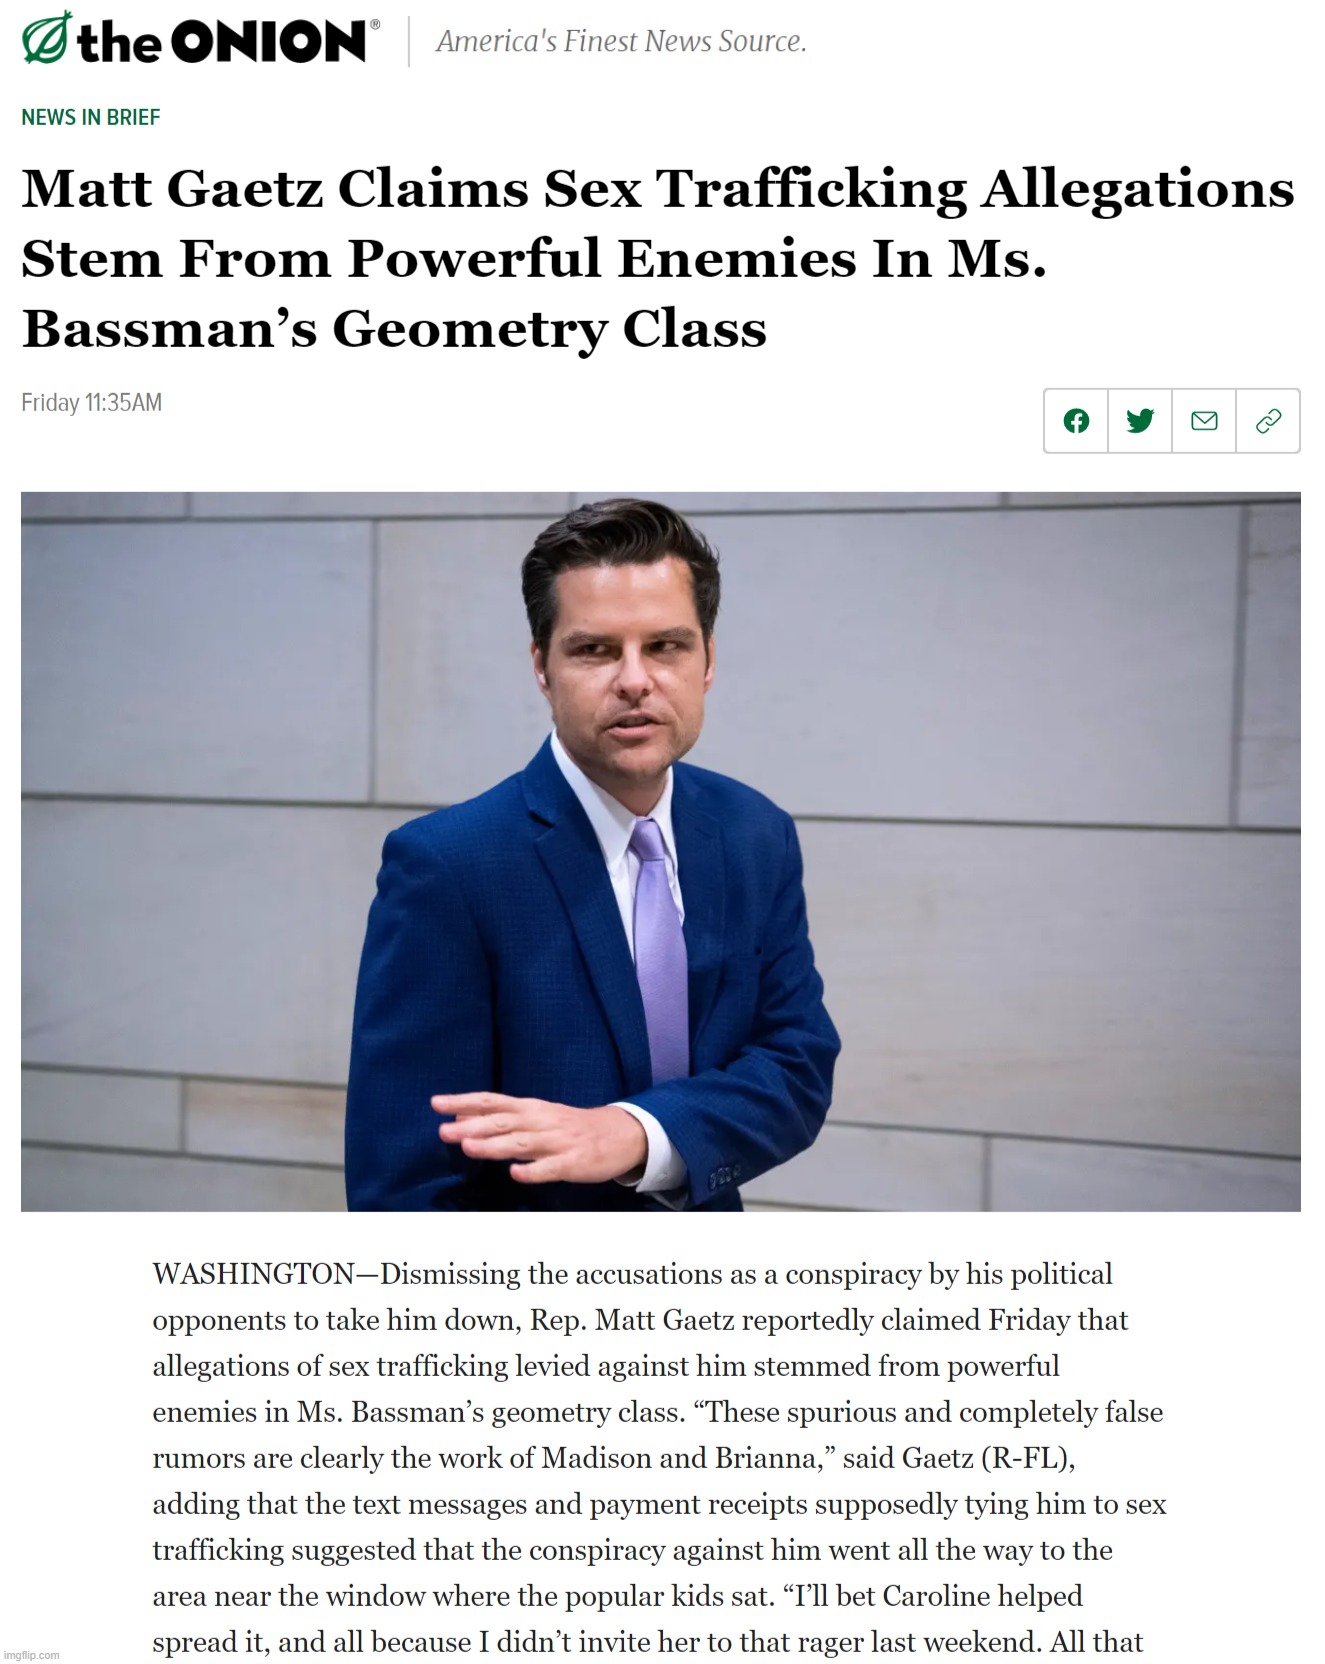 watch out for the deep class, roll safe n talk to the principal maga | image tagged in the onion banner,matt goetz the onion,pedo,maga,repost,pedophile | made w/ Imgflip meme maker